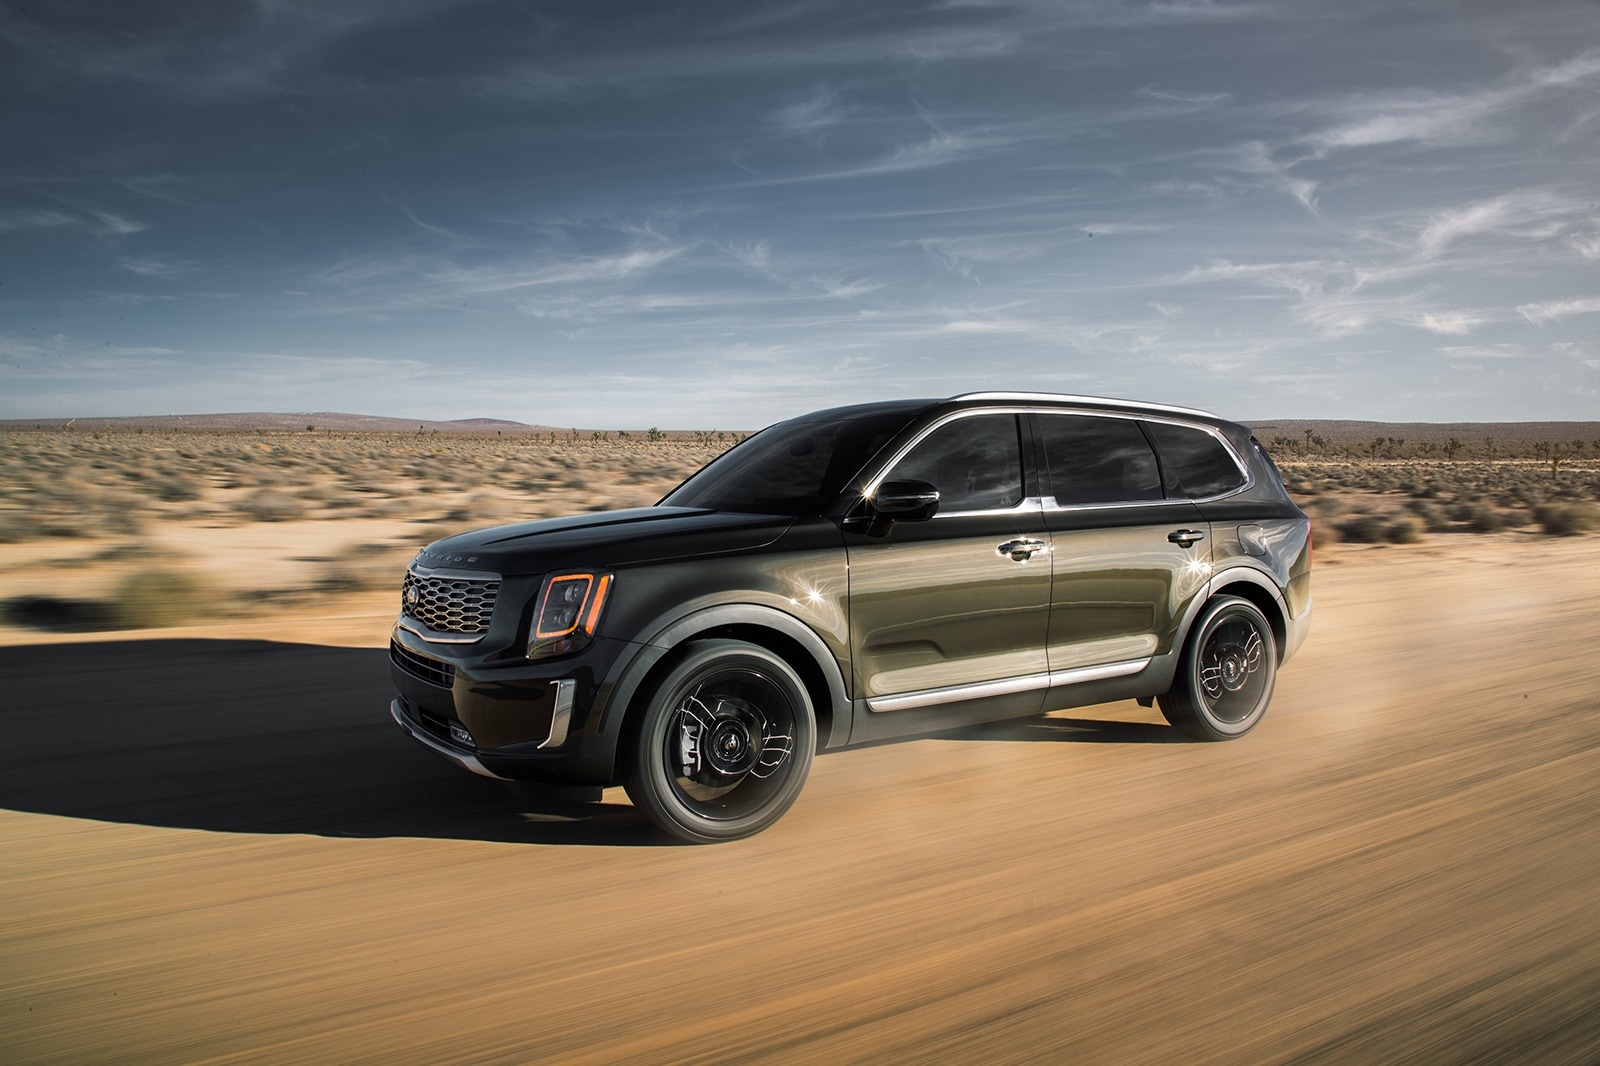 Synlig Hurtigt petroleum Best 3-Row SUVs - Top-Rated SUVs With 3 Rows for 2020 | Edmunds